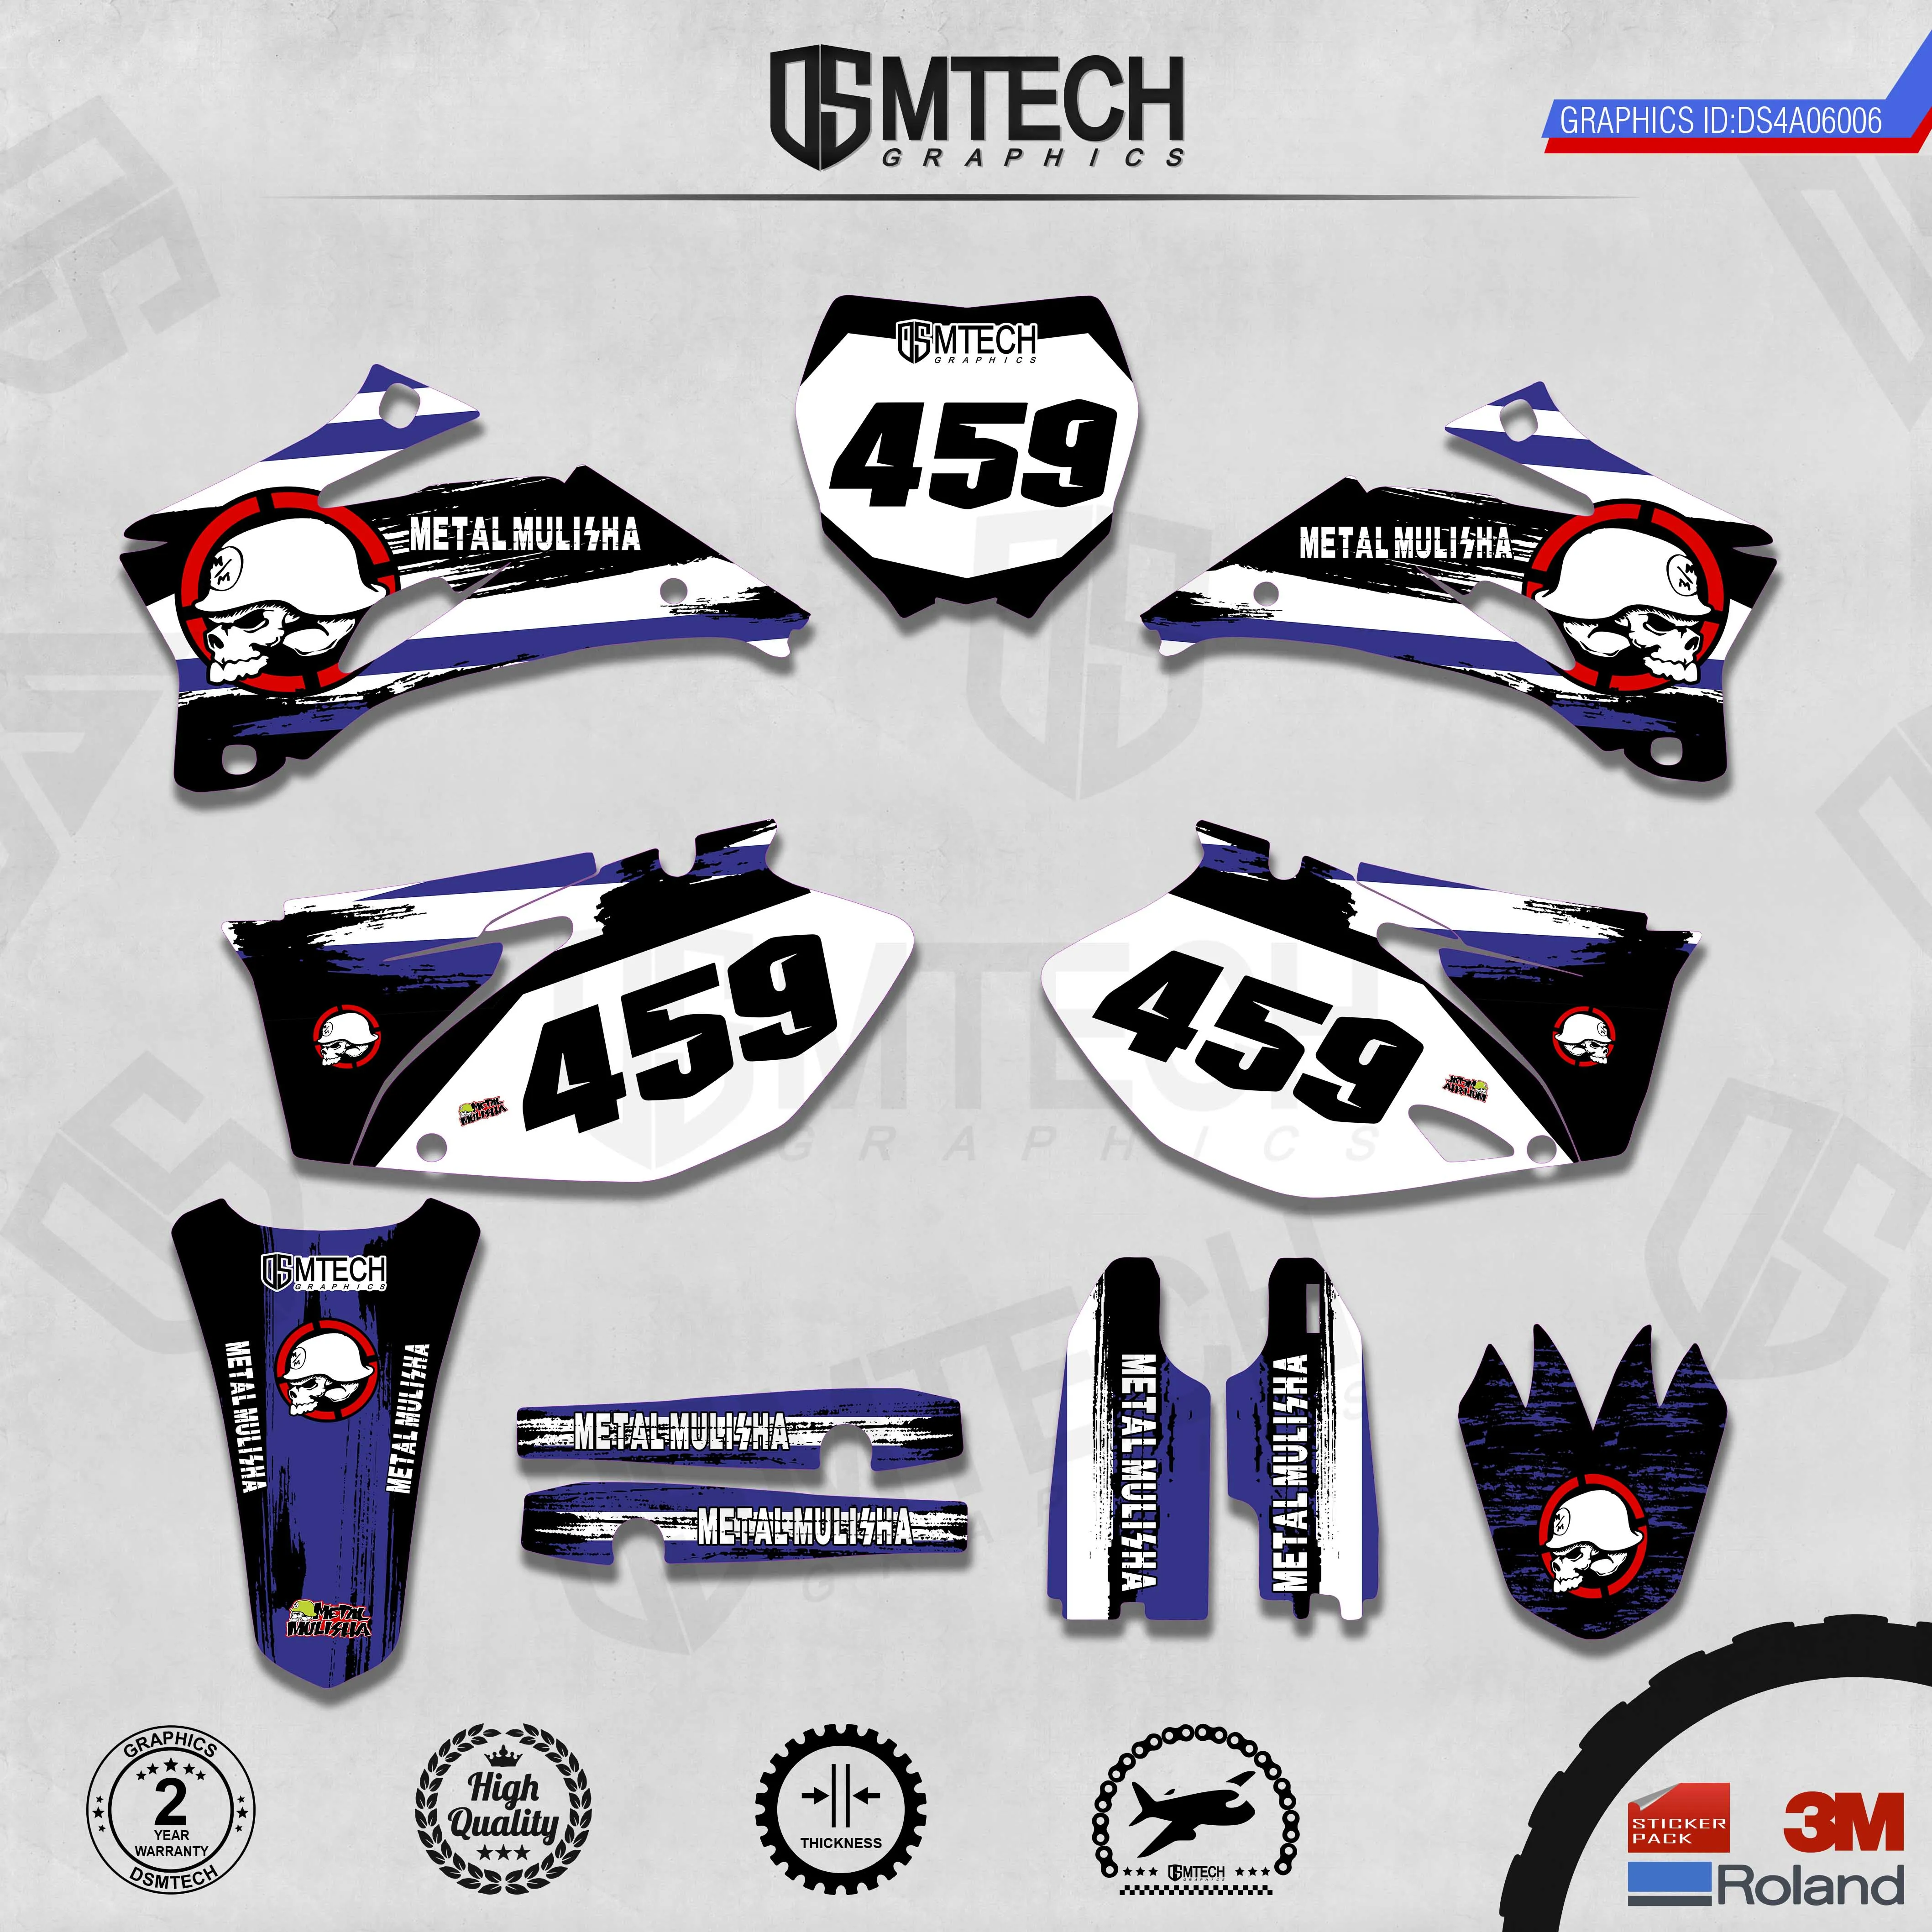 DSMTECH Customized Team Graphics Backgrounds Decals 3M Custom Stickers For  06-09 YZF250-450  07-14 WR250F  07-11WR450F  006